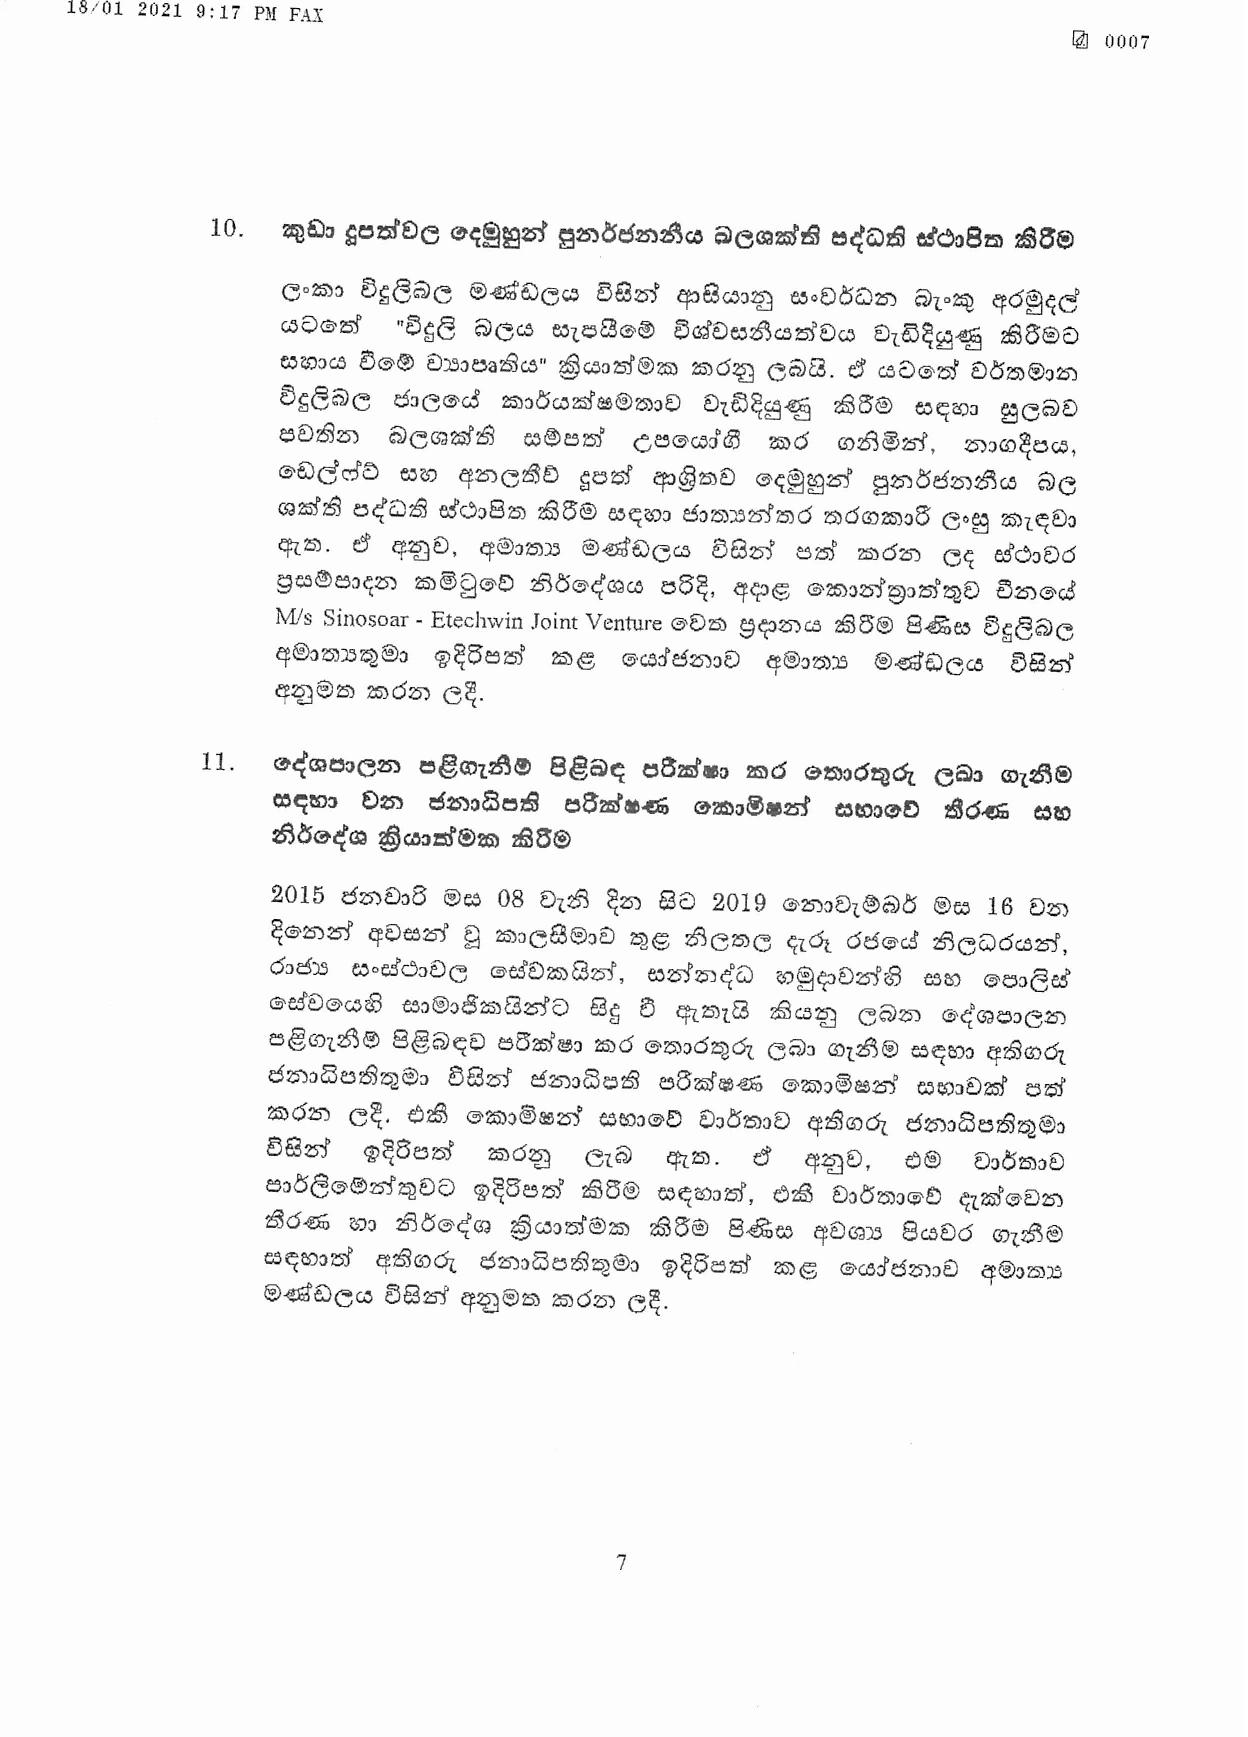 Cabinet Decision on 18.01.2021 page 007